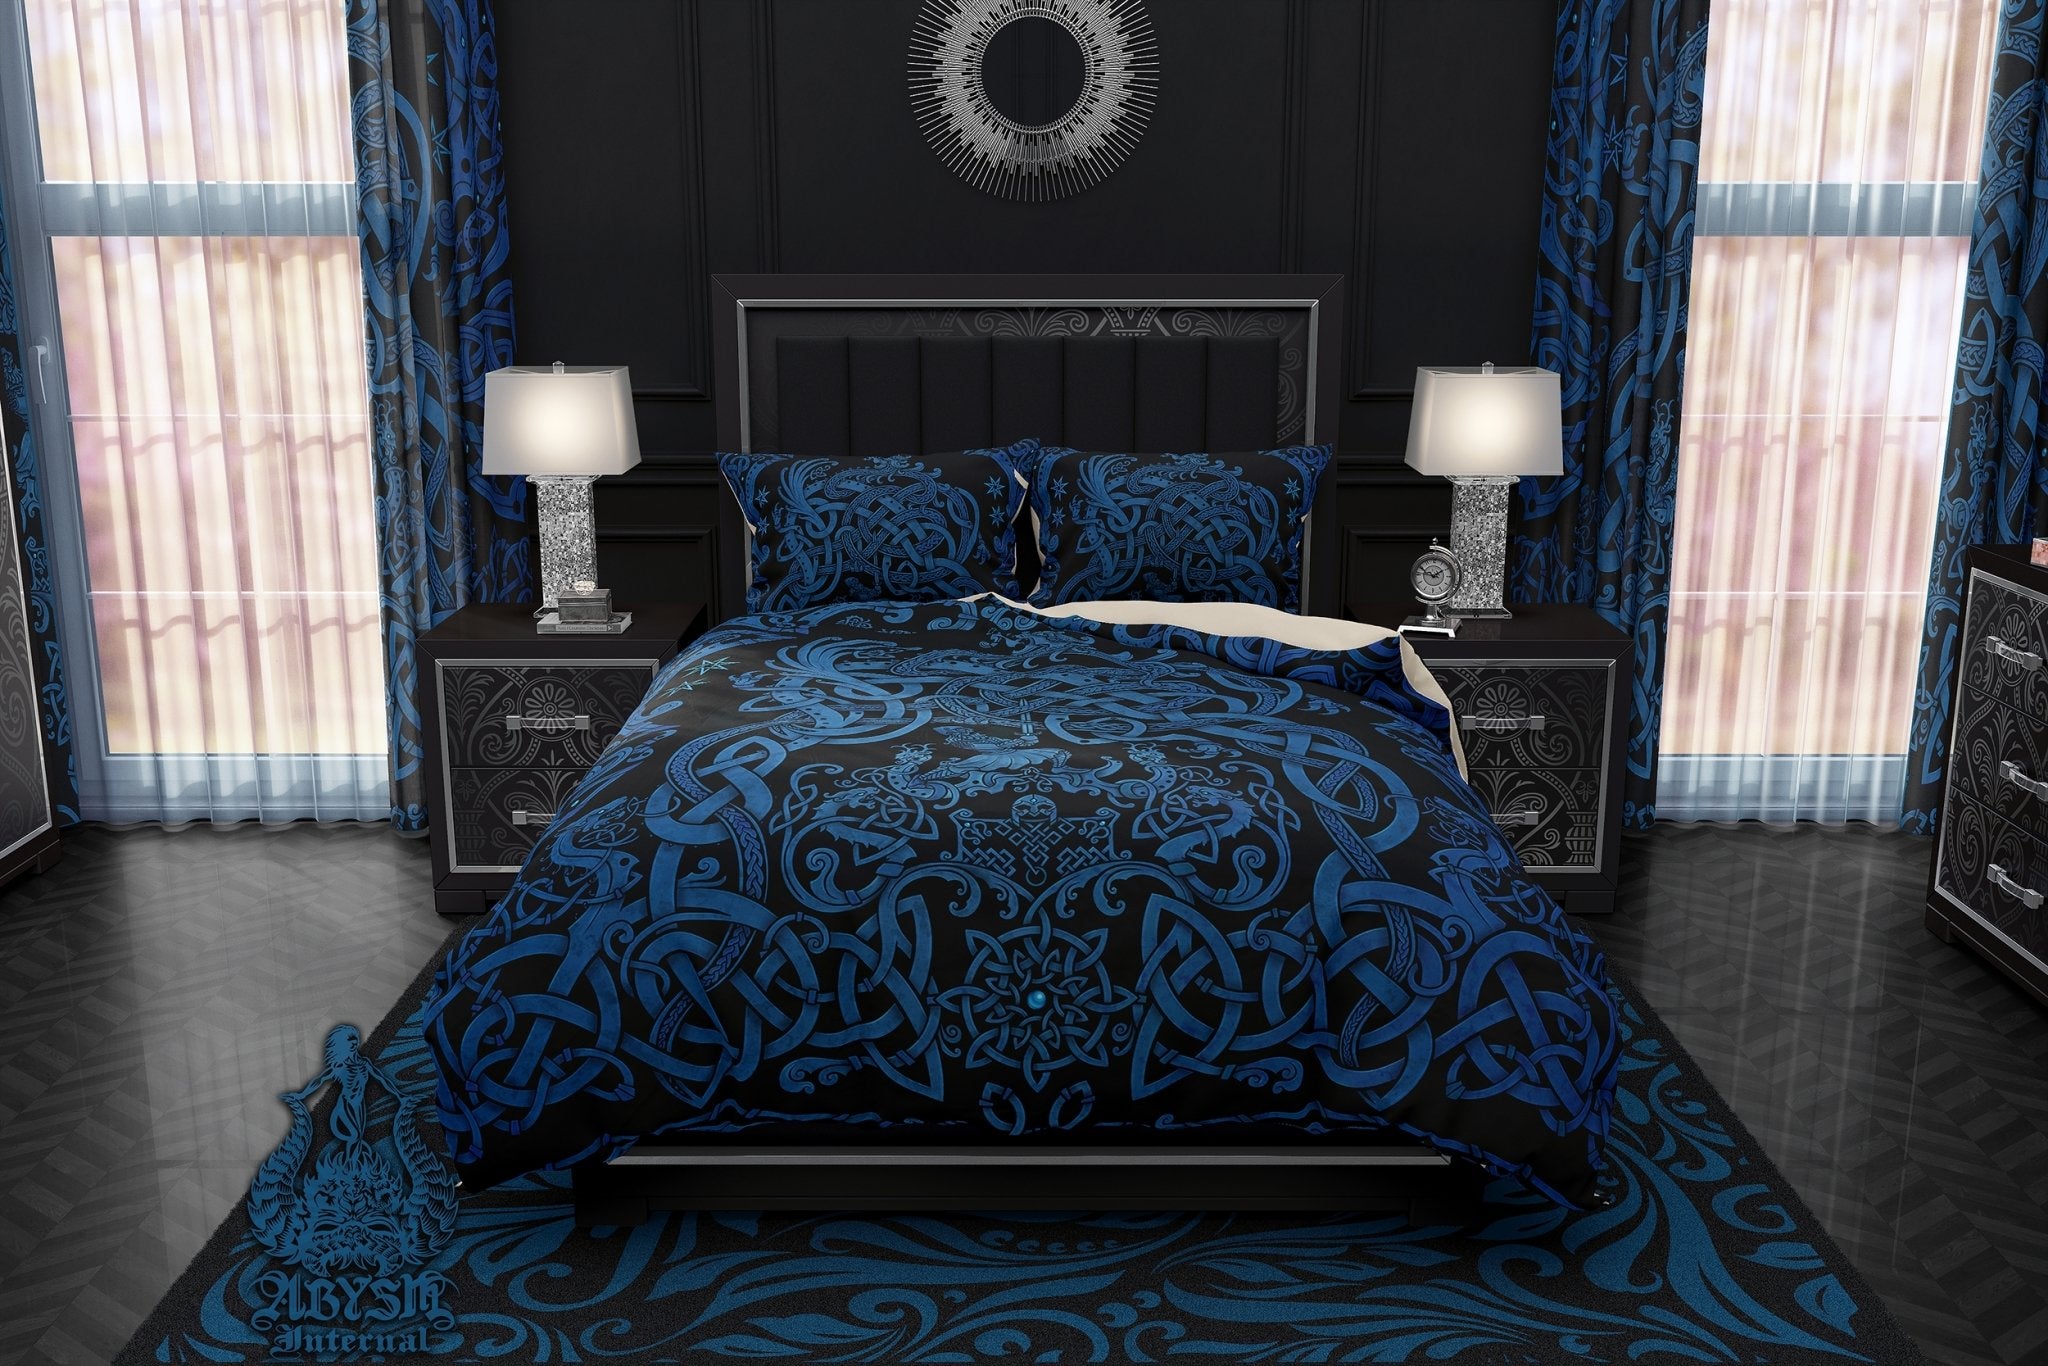 Viking Bedding Set, Comforter and Duvet, Norse Bed Cover and Bedroom Decor, Nordic Art, Sigurd kills Dragon Fafnir, King, Queen and Twin Size - Black & Blue - Abysm Internal